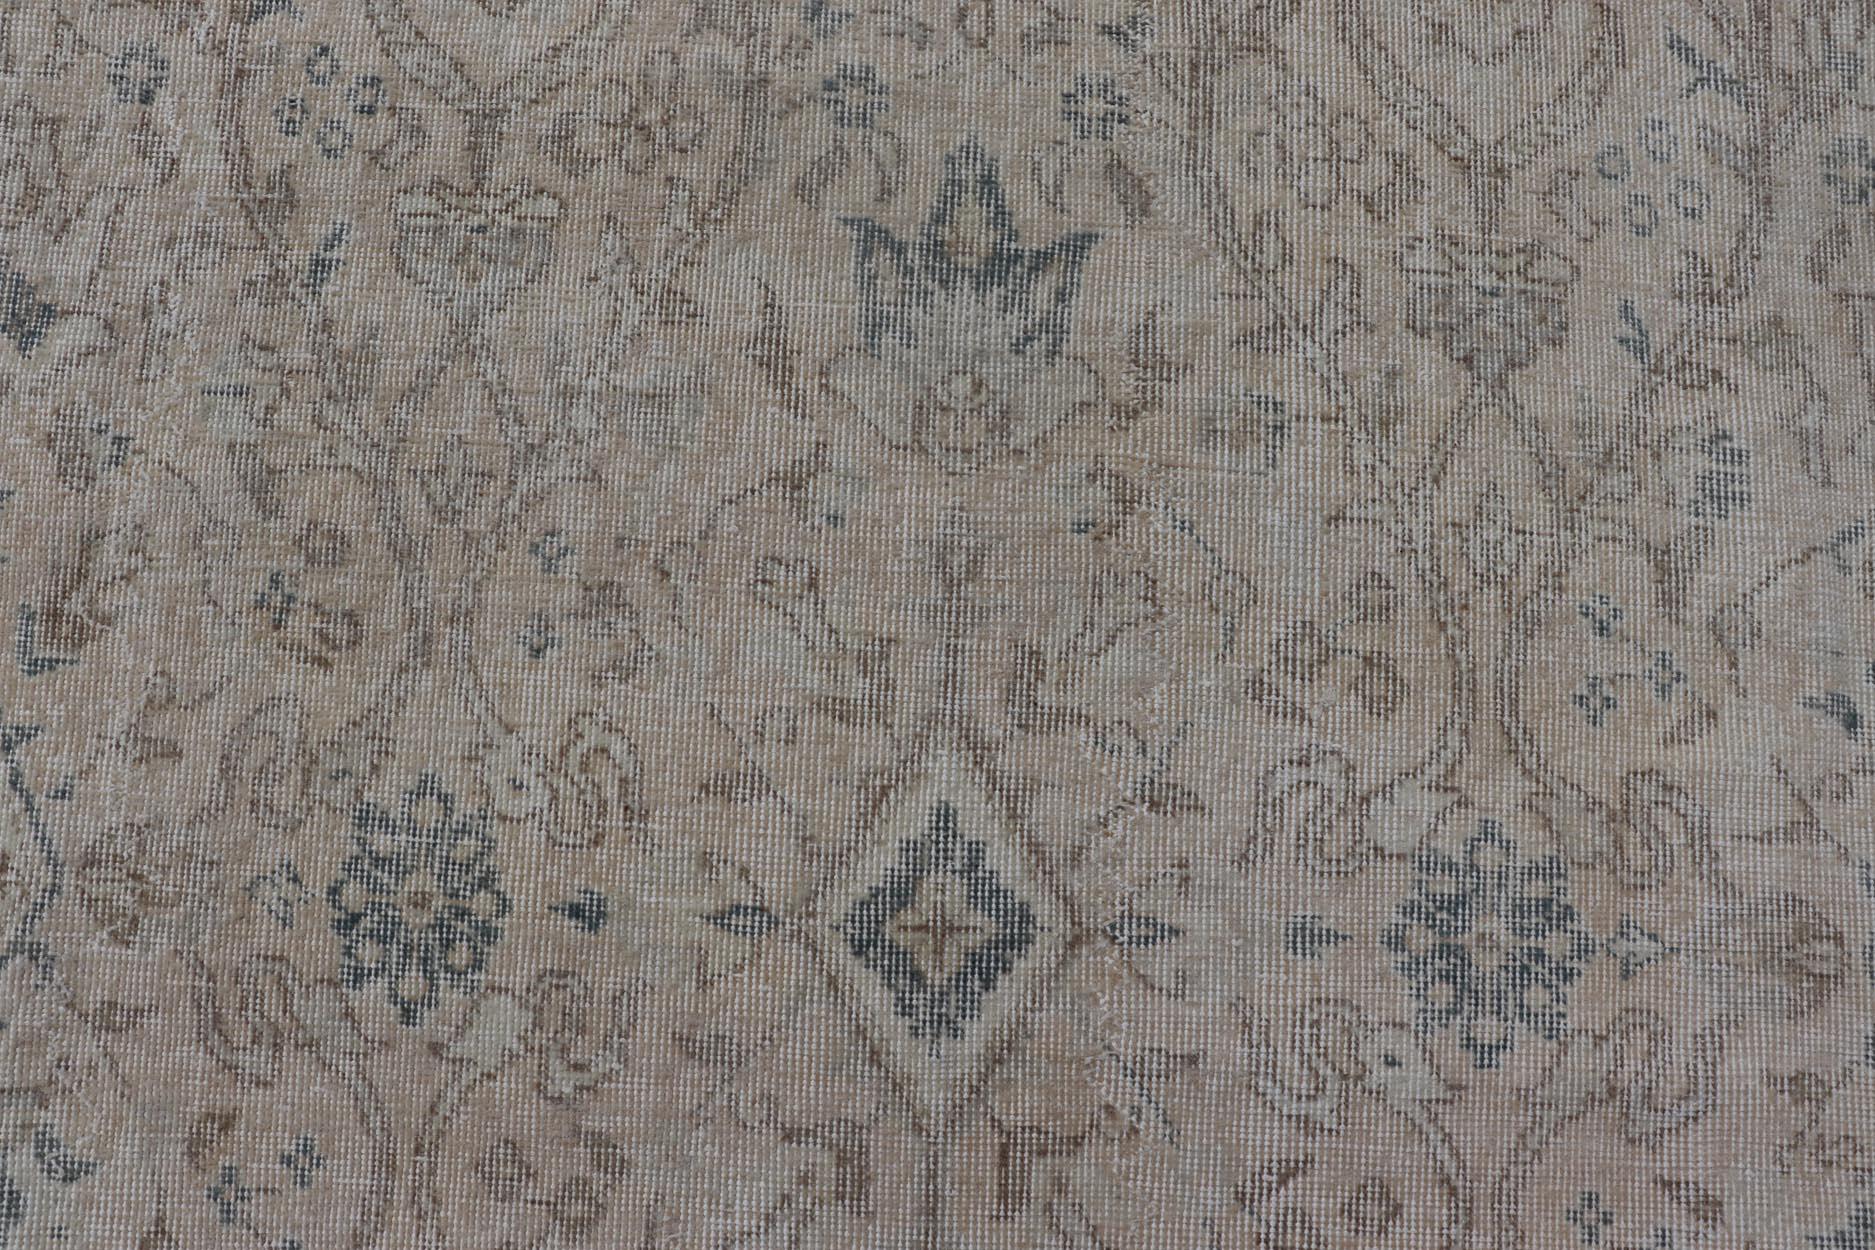 Blush, Cream, light brown, gray blue and Blue Vintage Turkish Distressed Rug with All-Over Floral Design in Tan, gray blue, light brown. Rug/EN-15414 country of origin / type: Turkey / Oushak, circa 1950.

Measures: 9'5 x 11'10 

This vintage